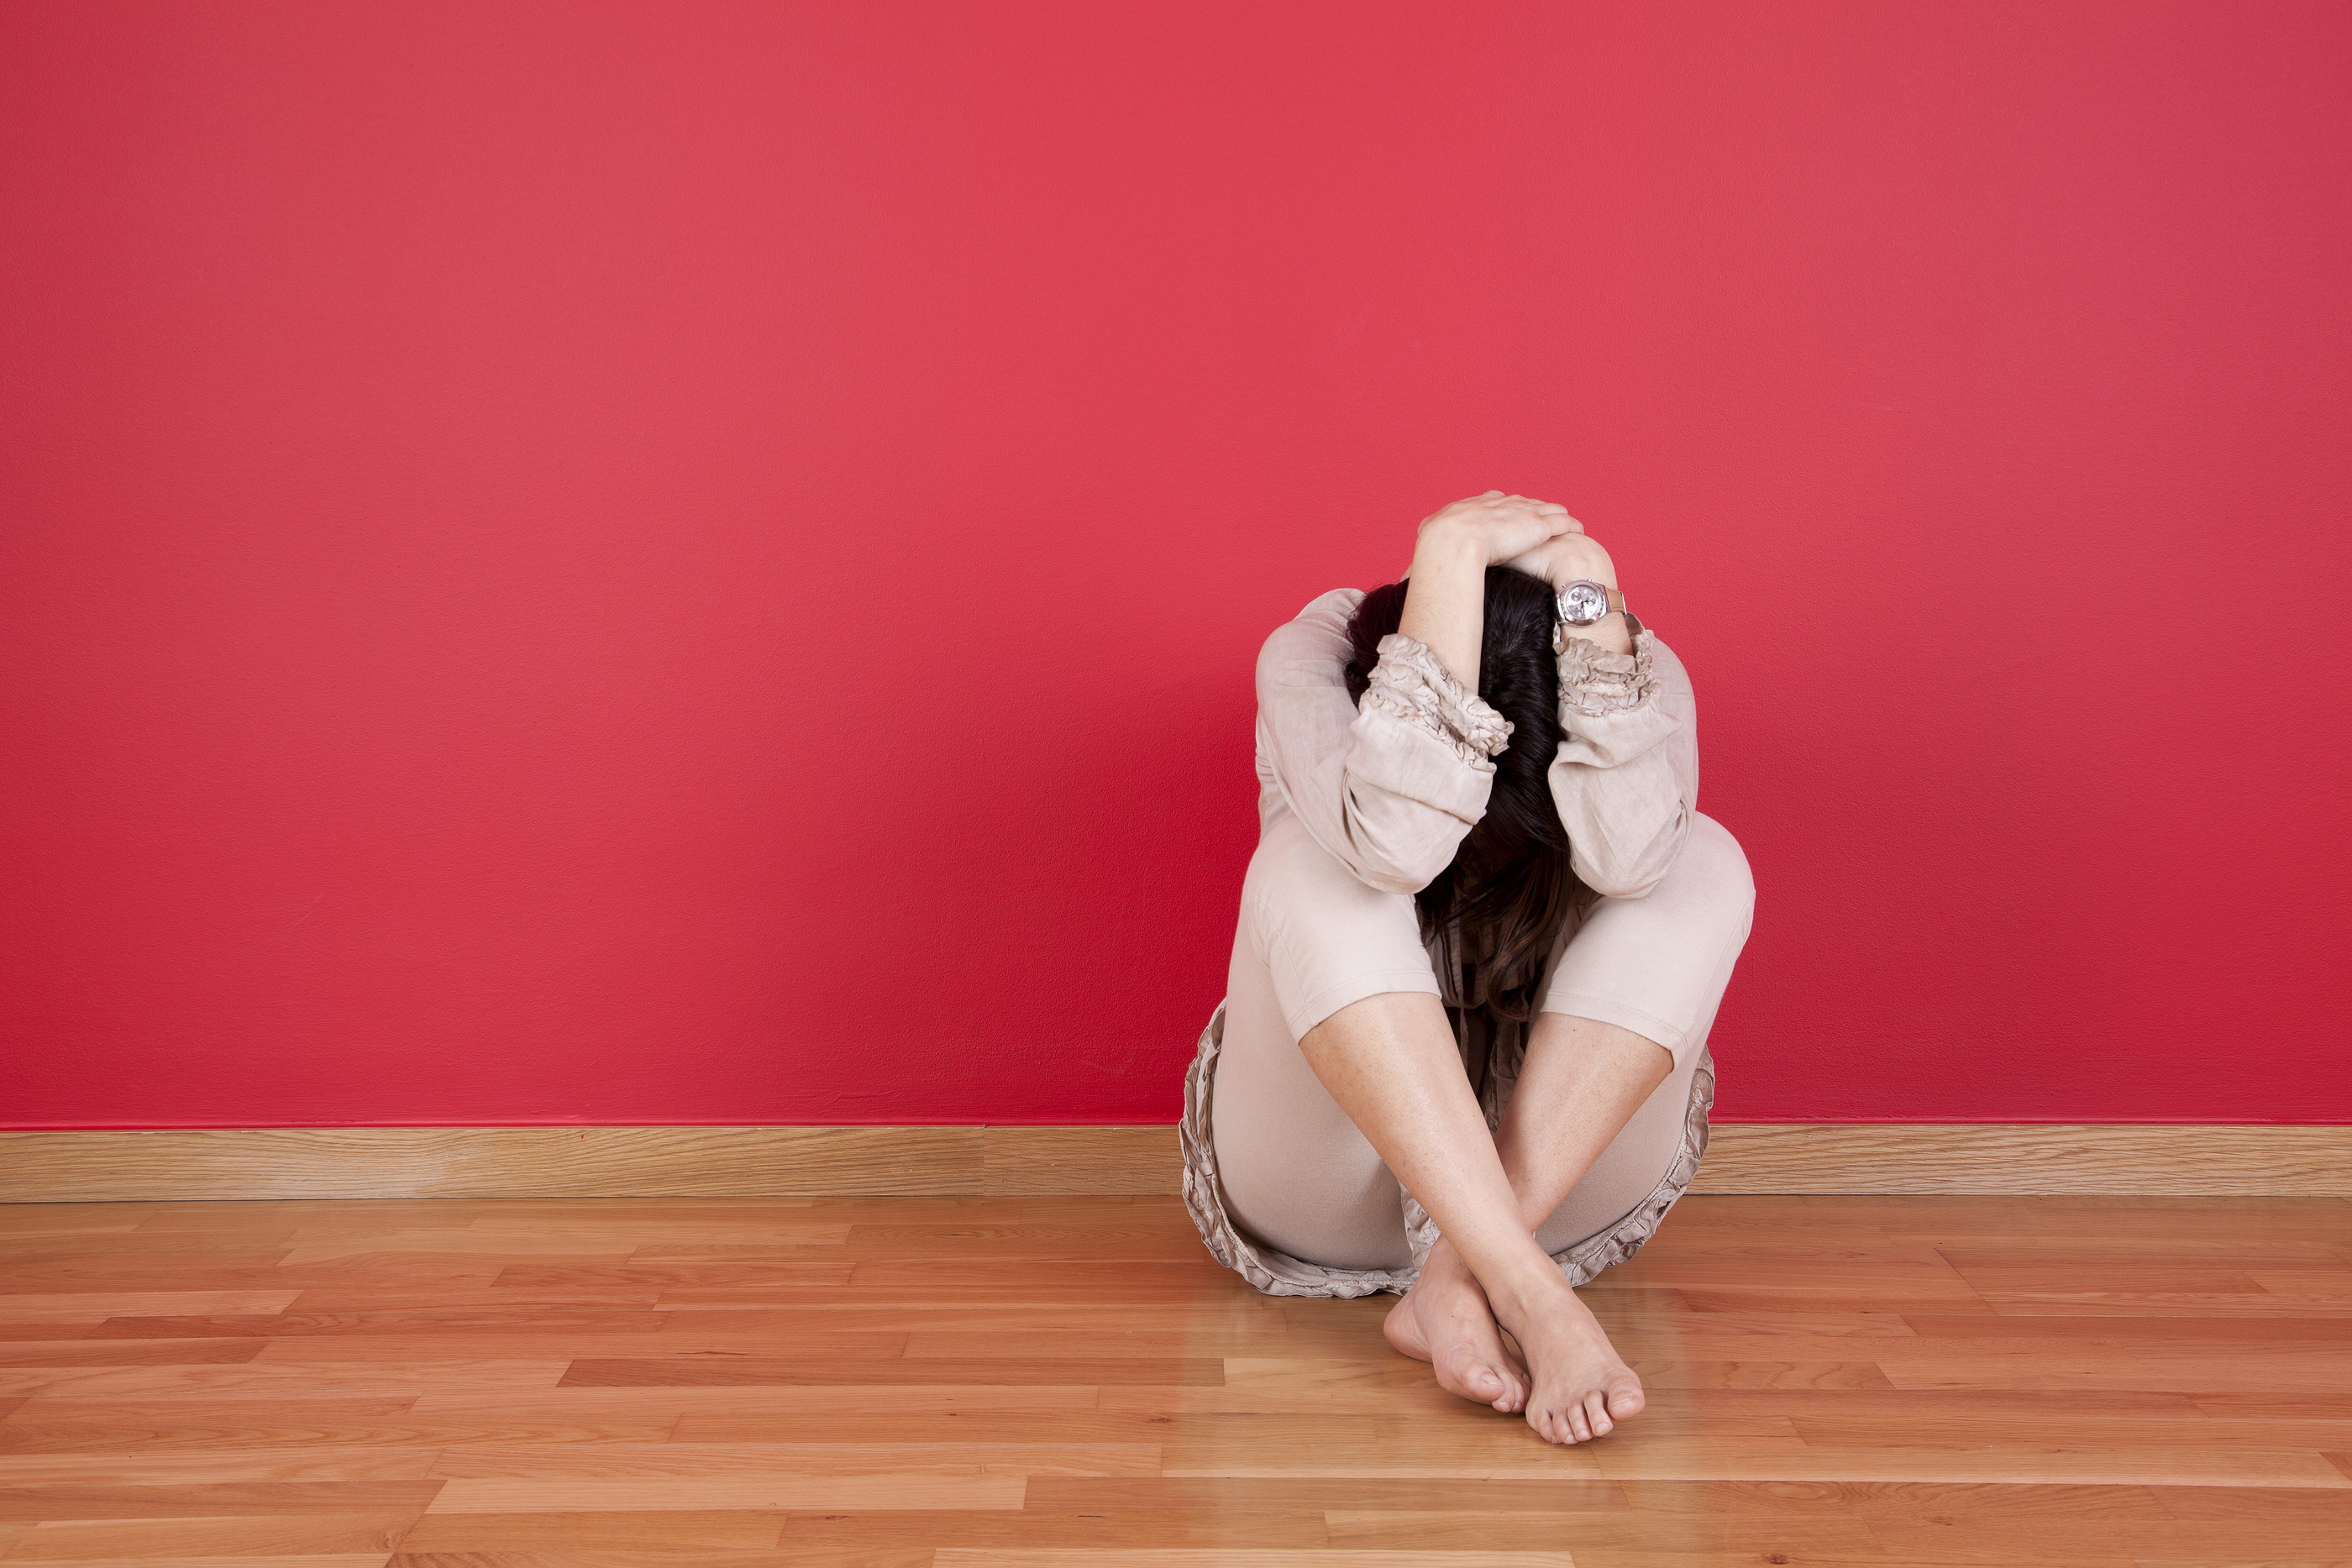 An image of a woman sitting and reclining against a red wall, who is holding her head in her hands